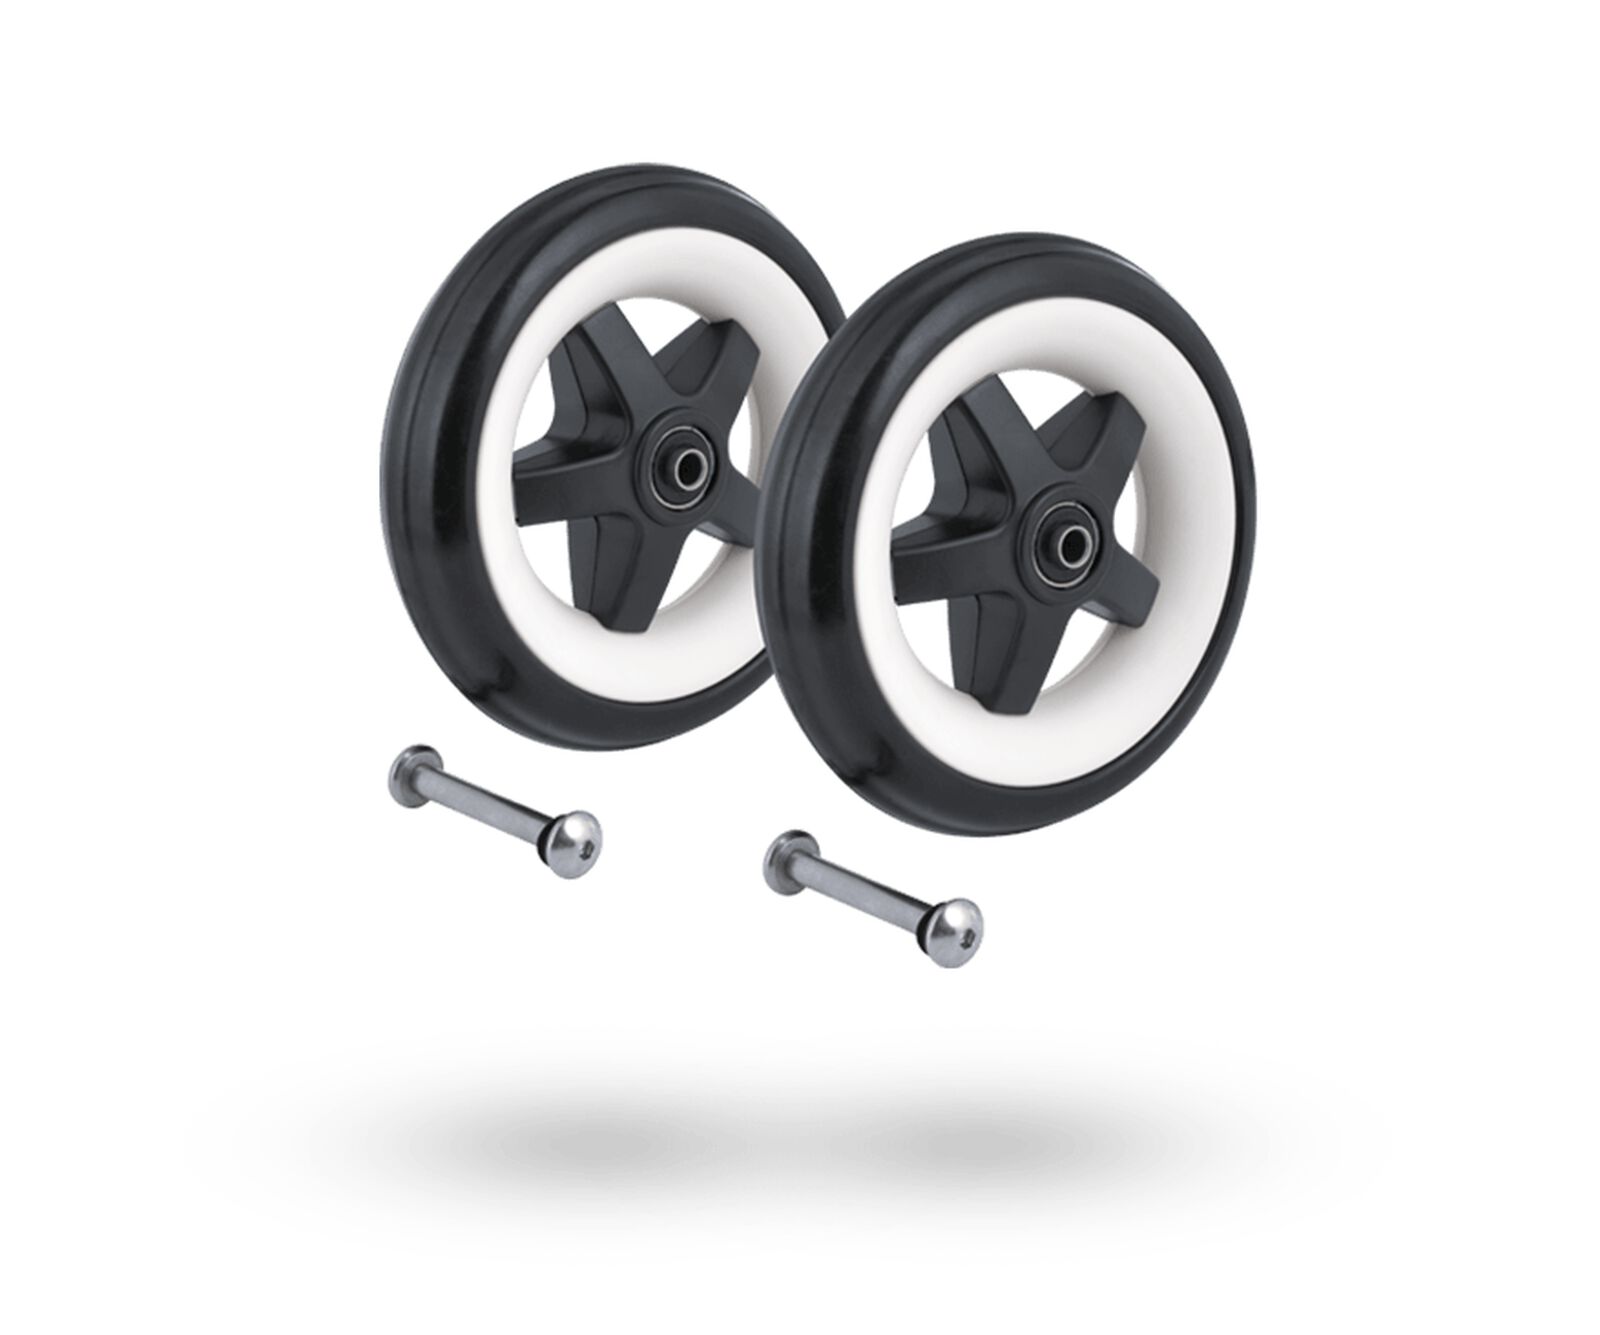 Bugaboo Bee (2010 model) front wheels replacement set